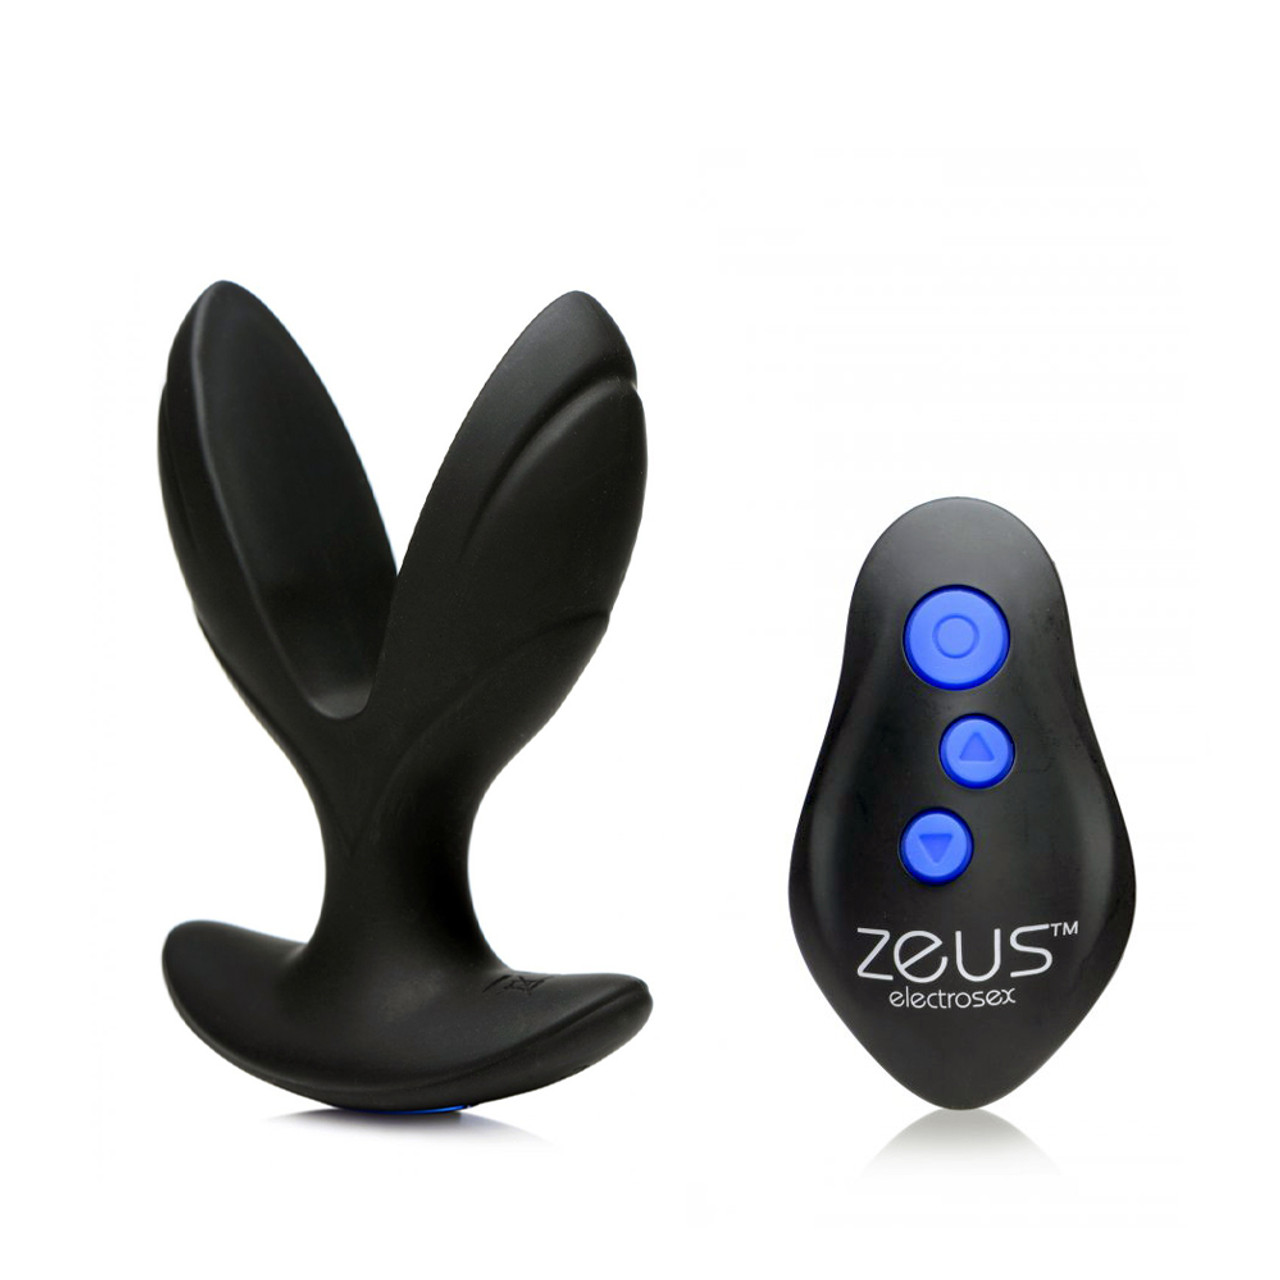 https://cdn11.bigcommerce.com/s-rph88/images/stencil/1280x1280/products/23808/215165/xr-brands-zeus-electrosex-electro-spread-64-function-remote-control-rechargeable-vibrating-e-stim-expanding-silicone-butt-plug-7__89449.1609278367.jpg?c=2